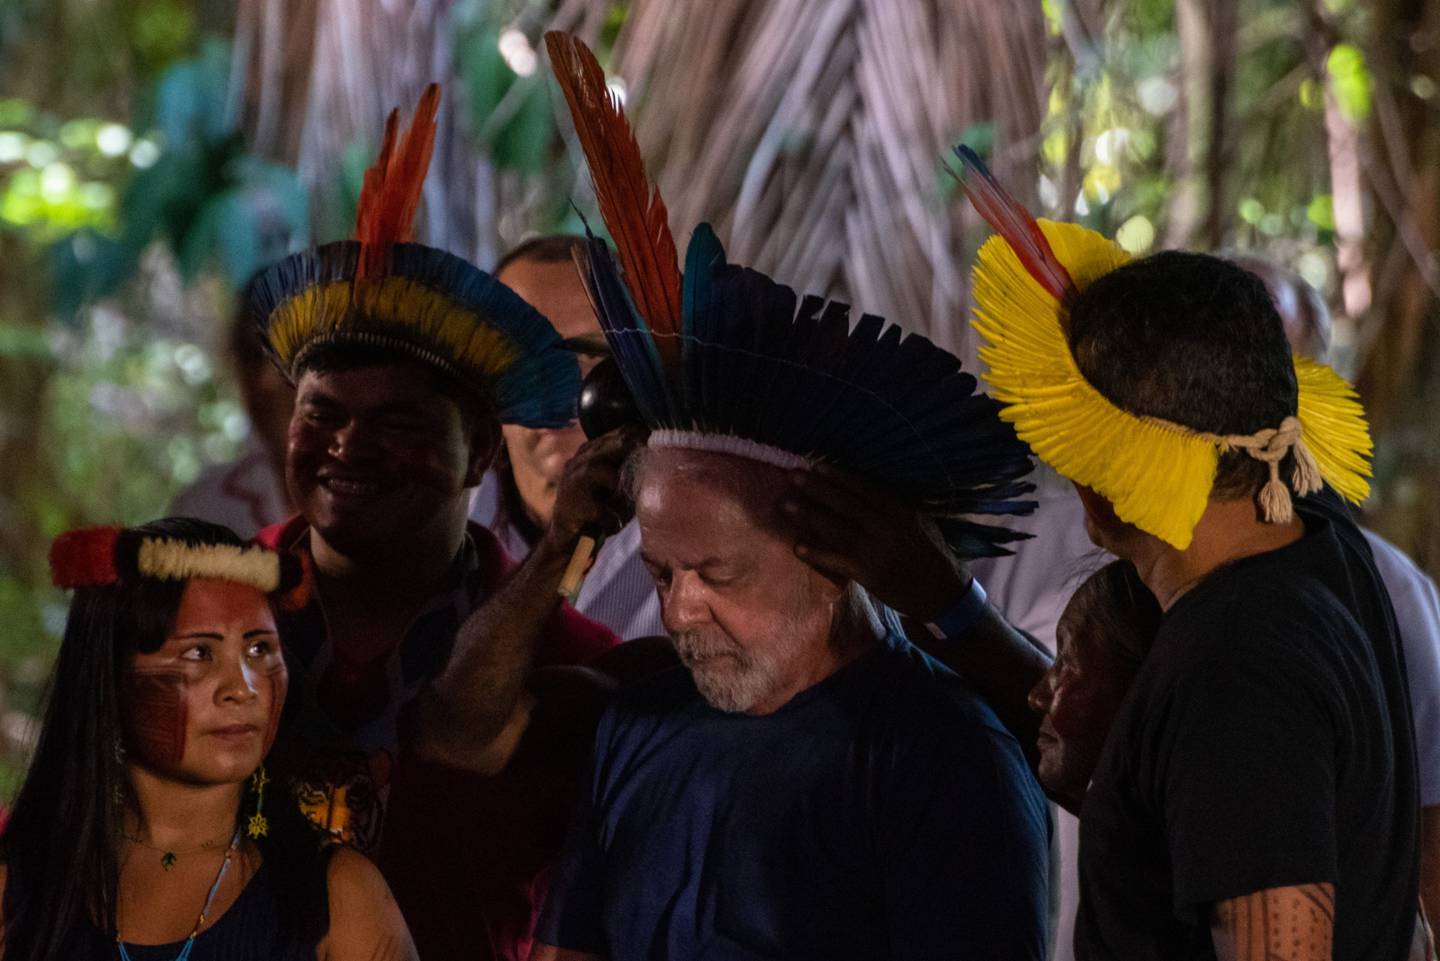 Following meetings with local leaders in the rainforest in northern Brazil, Lula said he’ll bolster environmental protection and indigenous land rights.